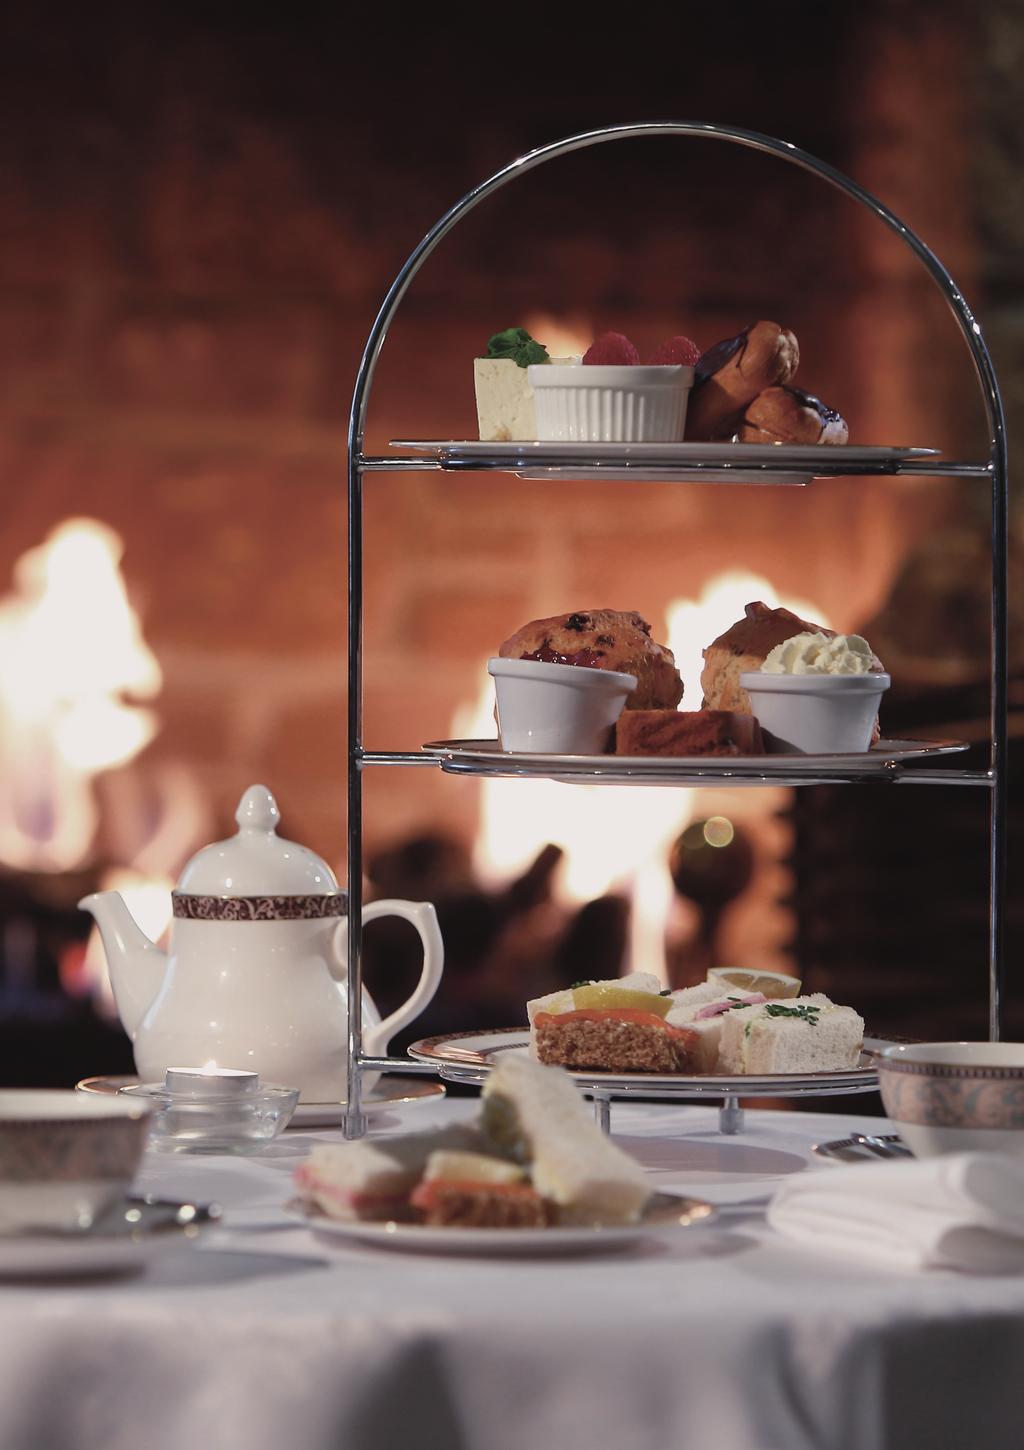 Festive Afternoon Tea Newparks Festive Afternoon Tea Recover after Christmas shopping; give the family a pre-christmas treat or simply get in the mood for the holidays.